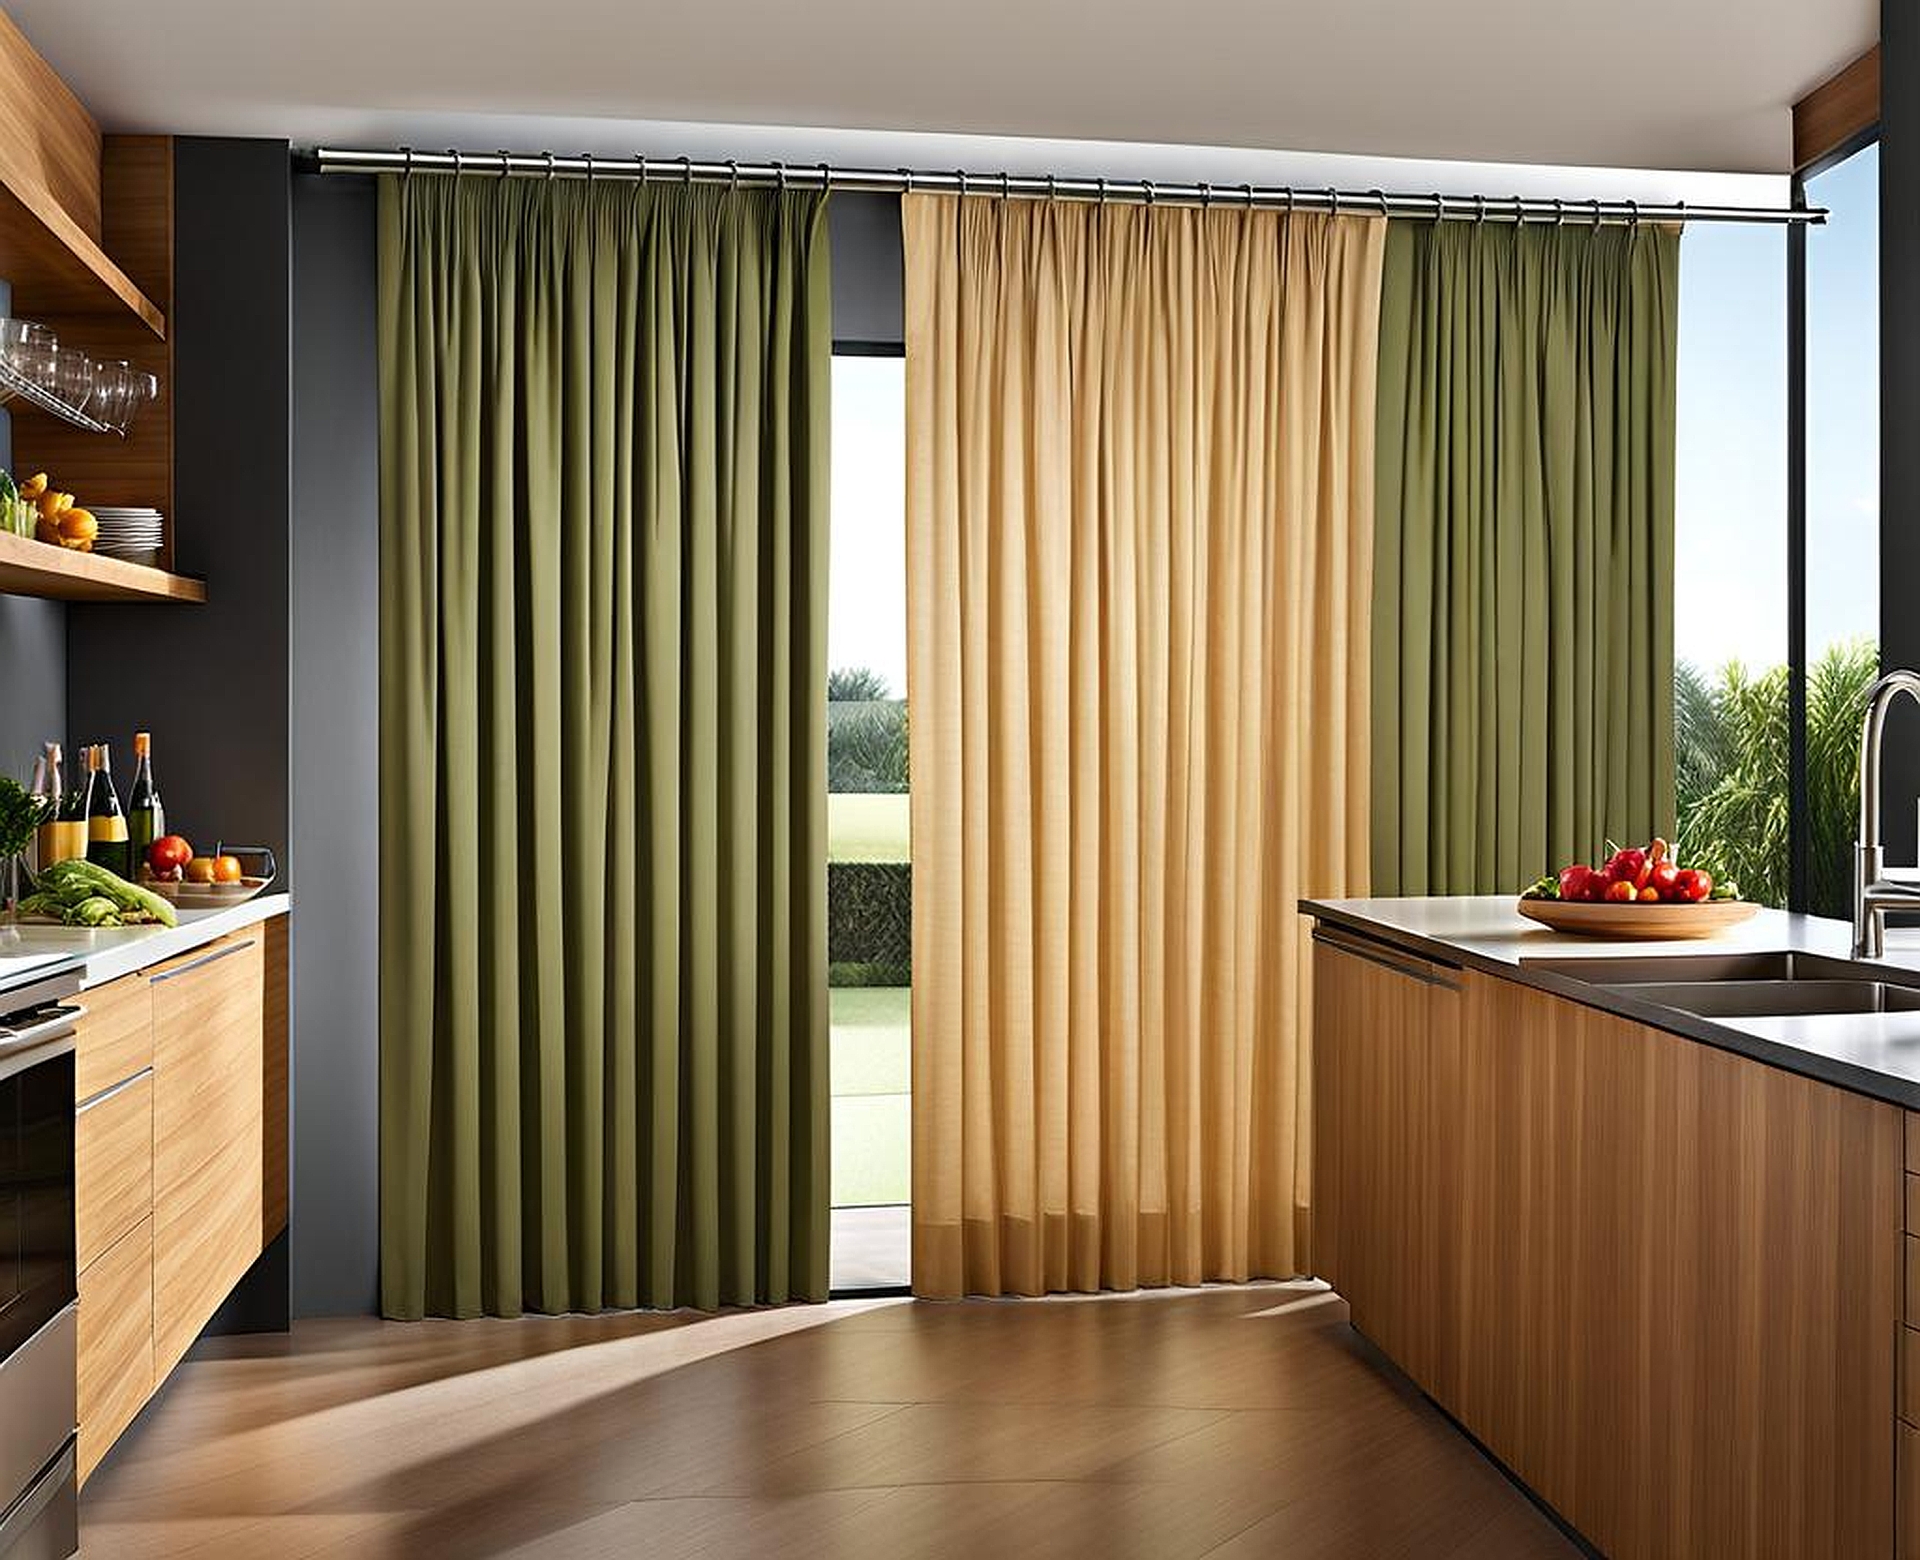 curtains for sliding glass doors in kitchen